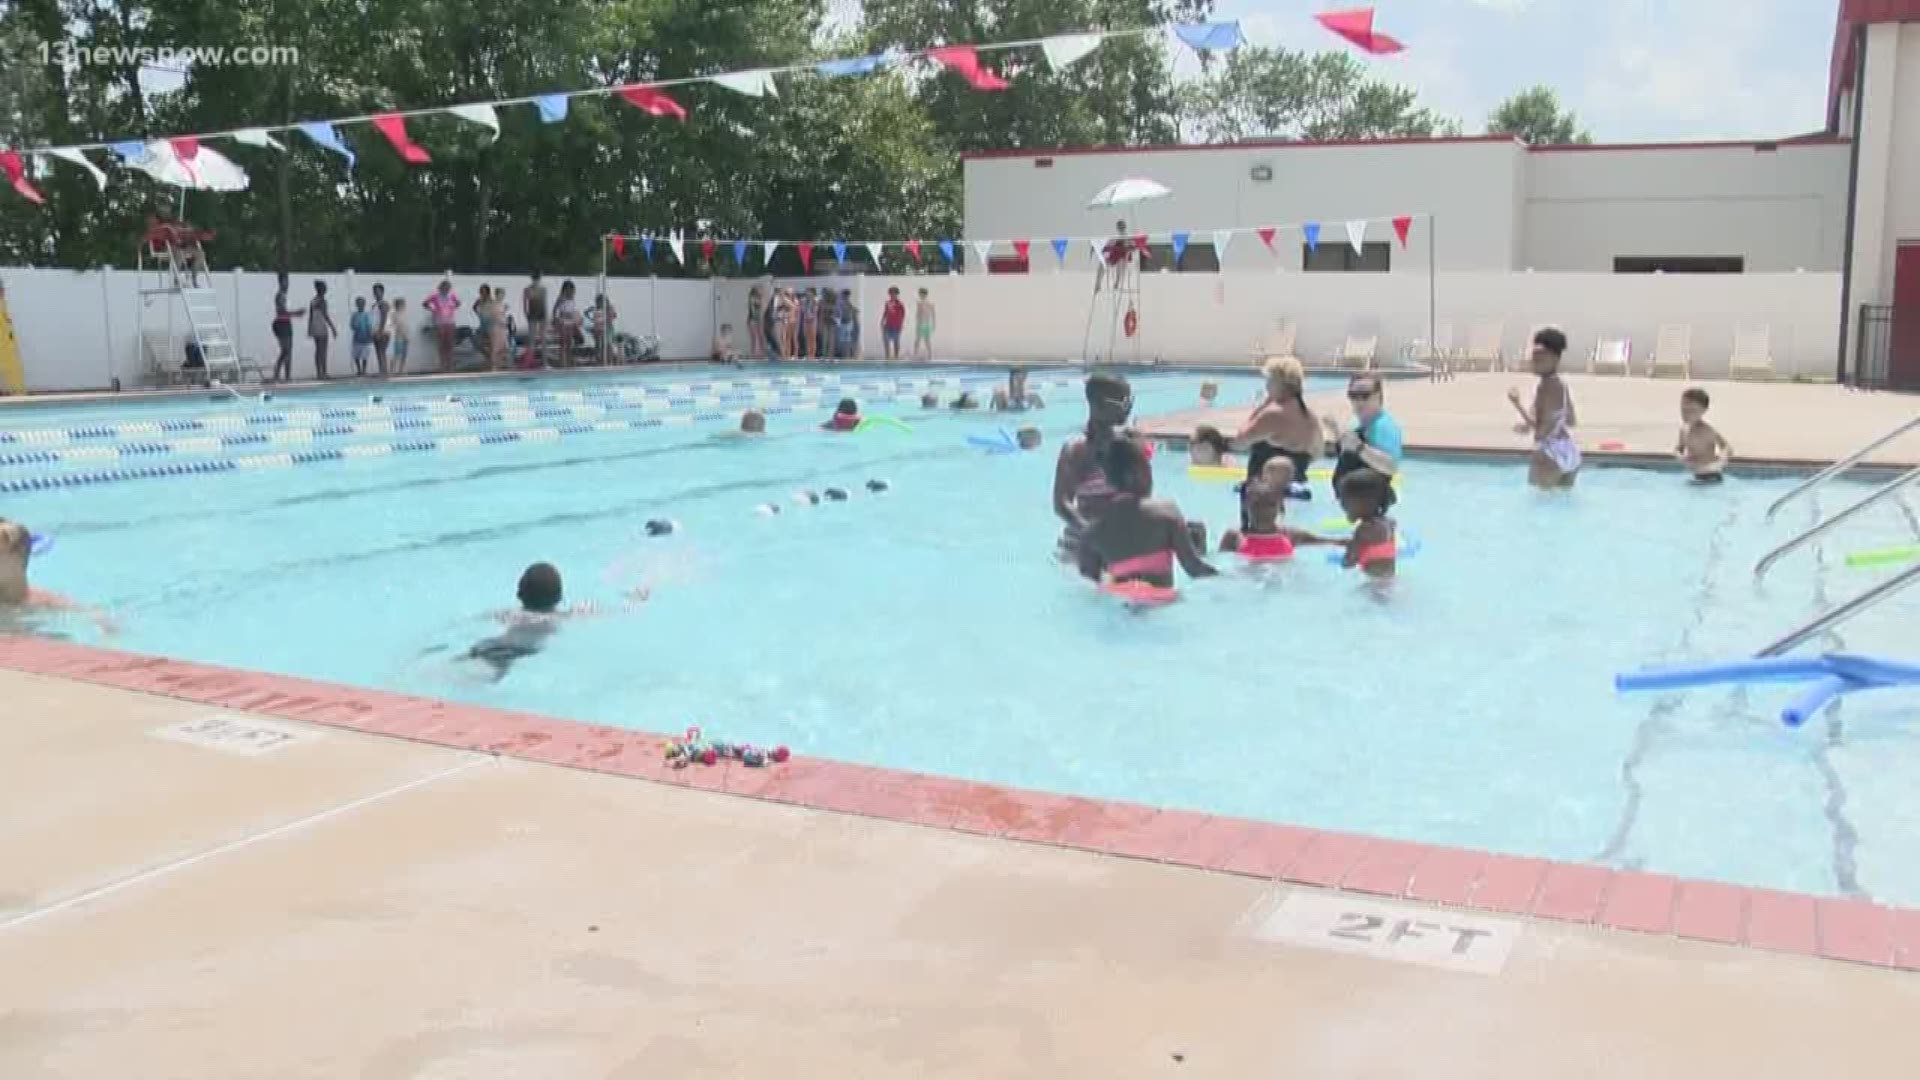 Doctors warn that swimming in the pool in excessive heat can dehydrate you. They're warning individuals to stay hydrated and to take breaks from the sun during the heatwave.